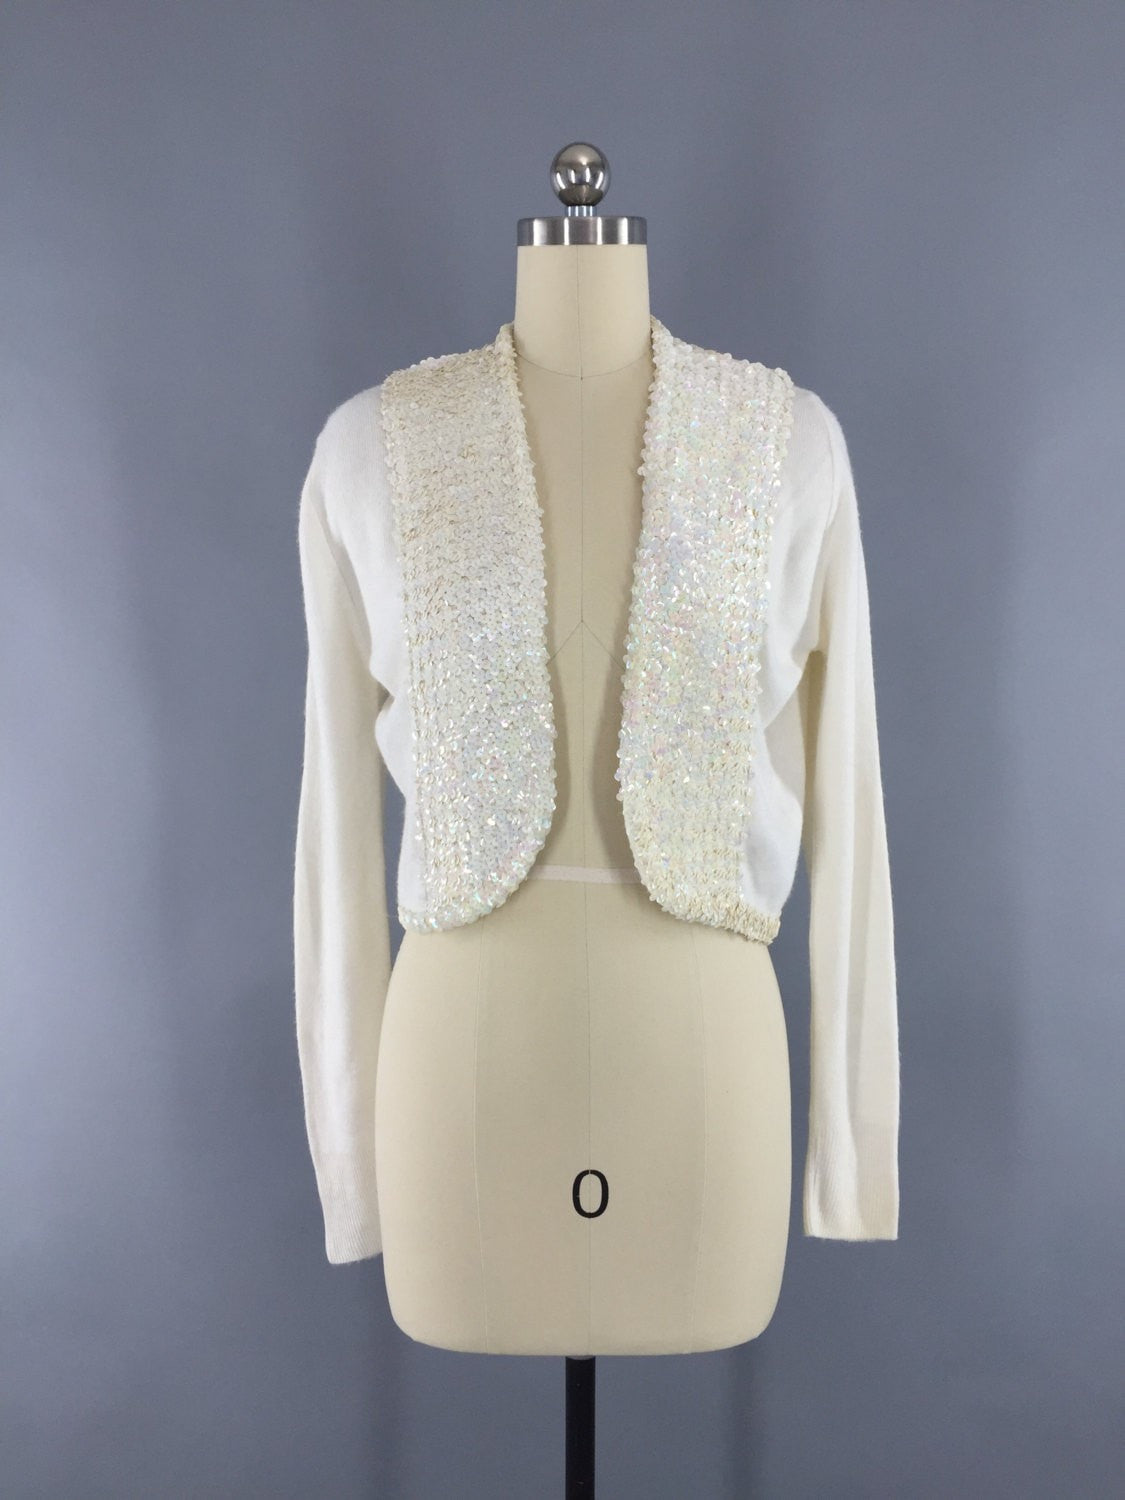 Vintage 1950s White Sequined Cropped Cardigan Sweater - ThisBlueBird